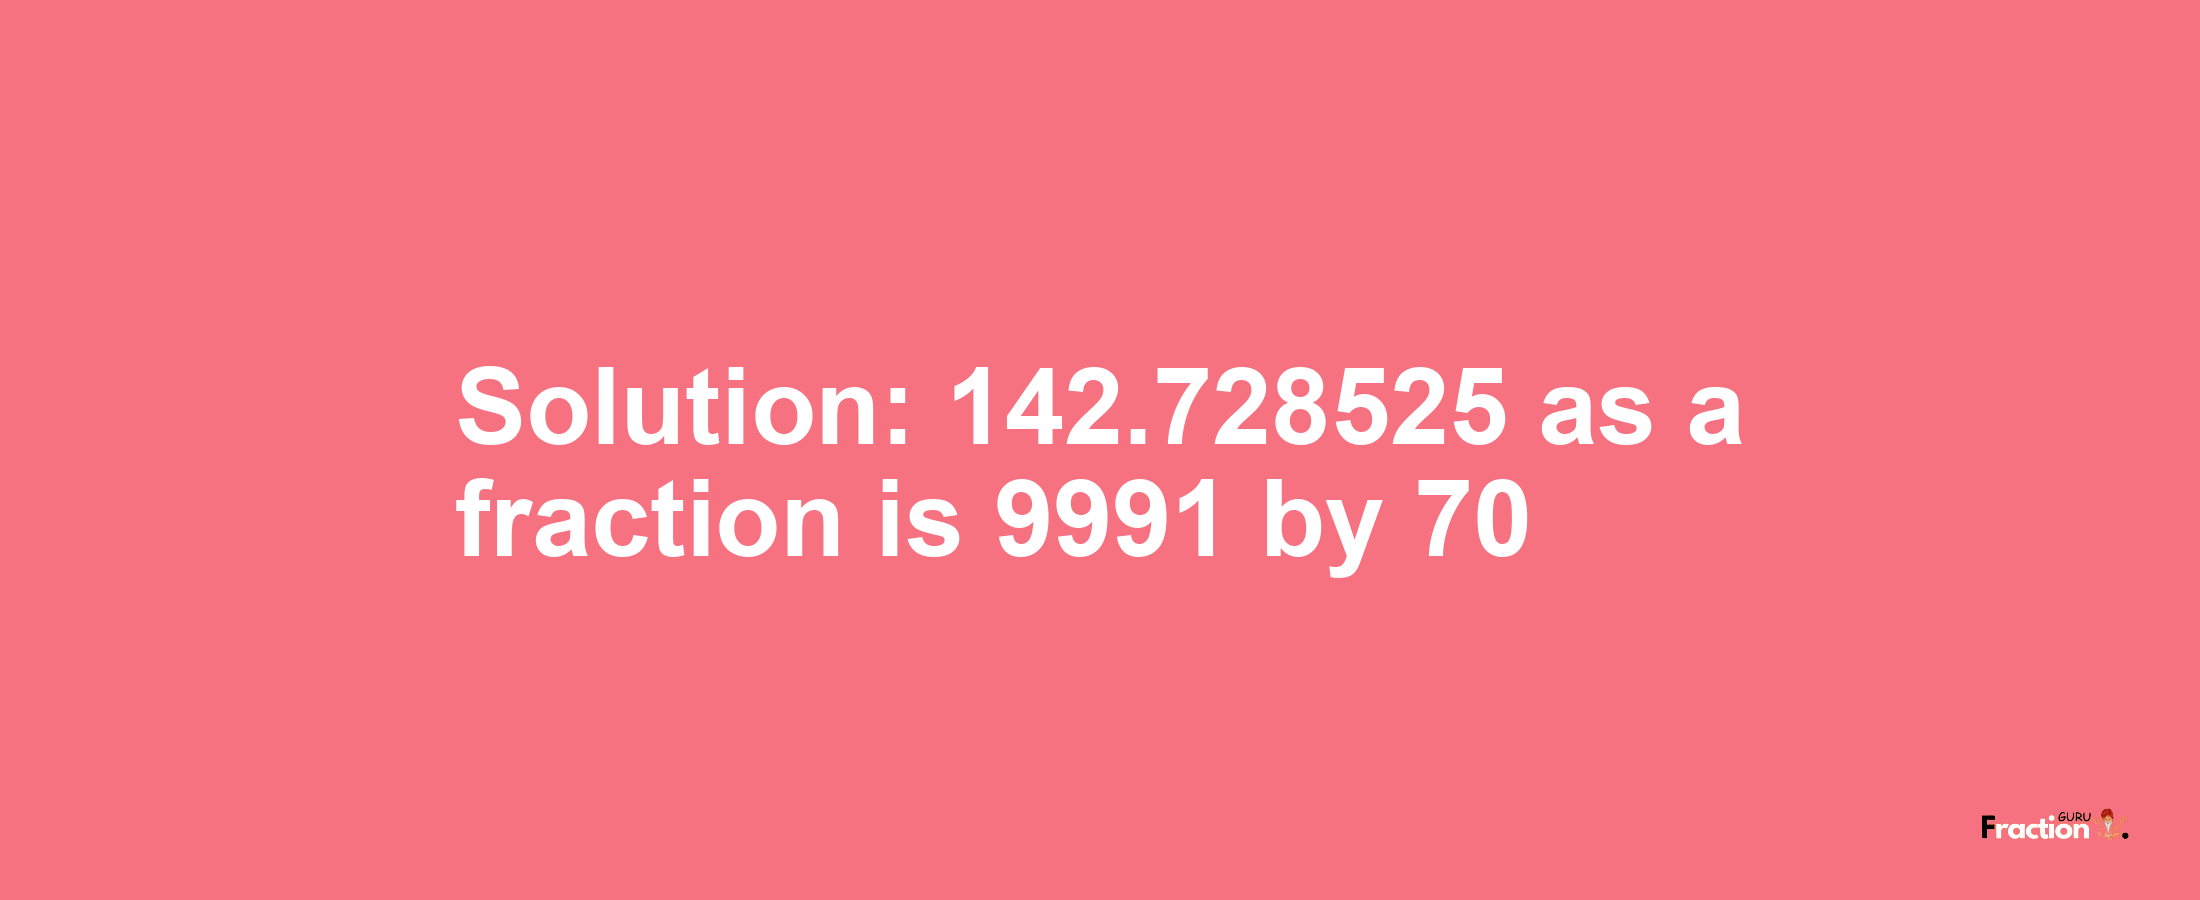 Solution:142.728525 as a fraction is 9991/70